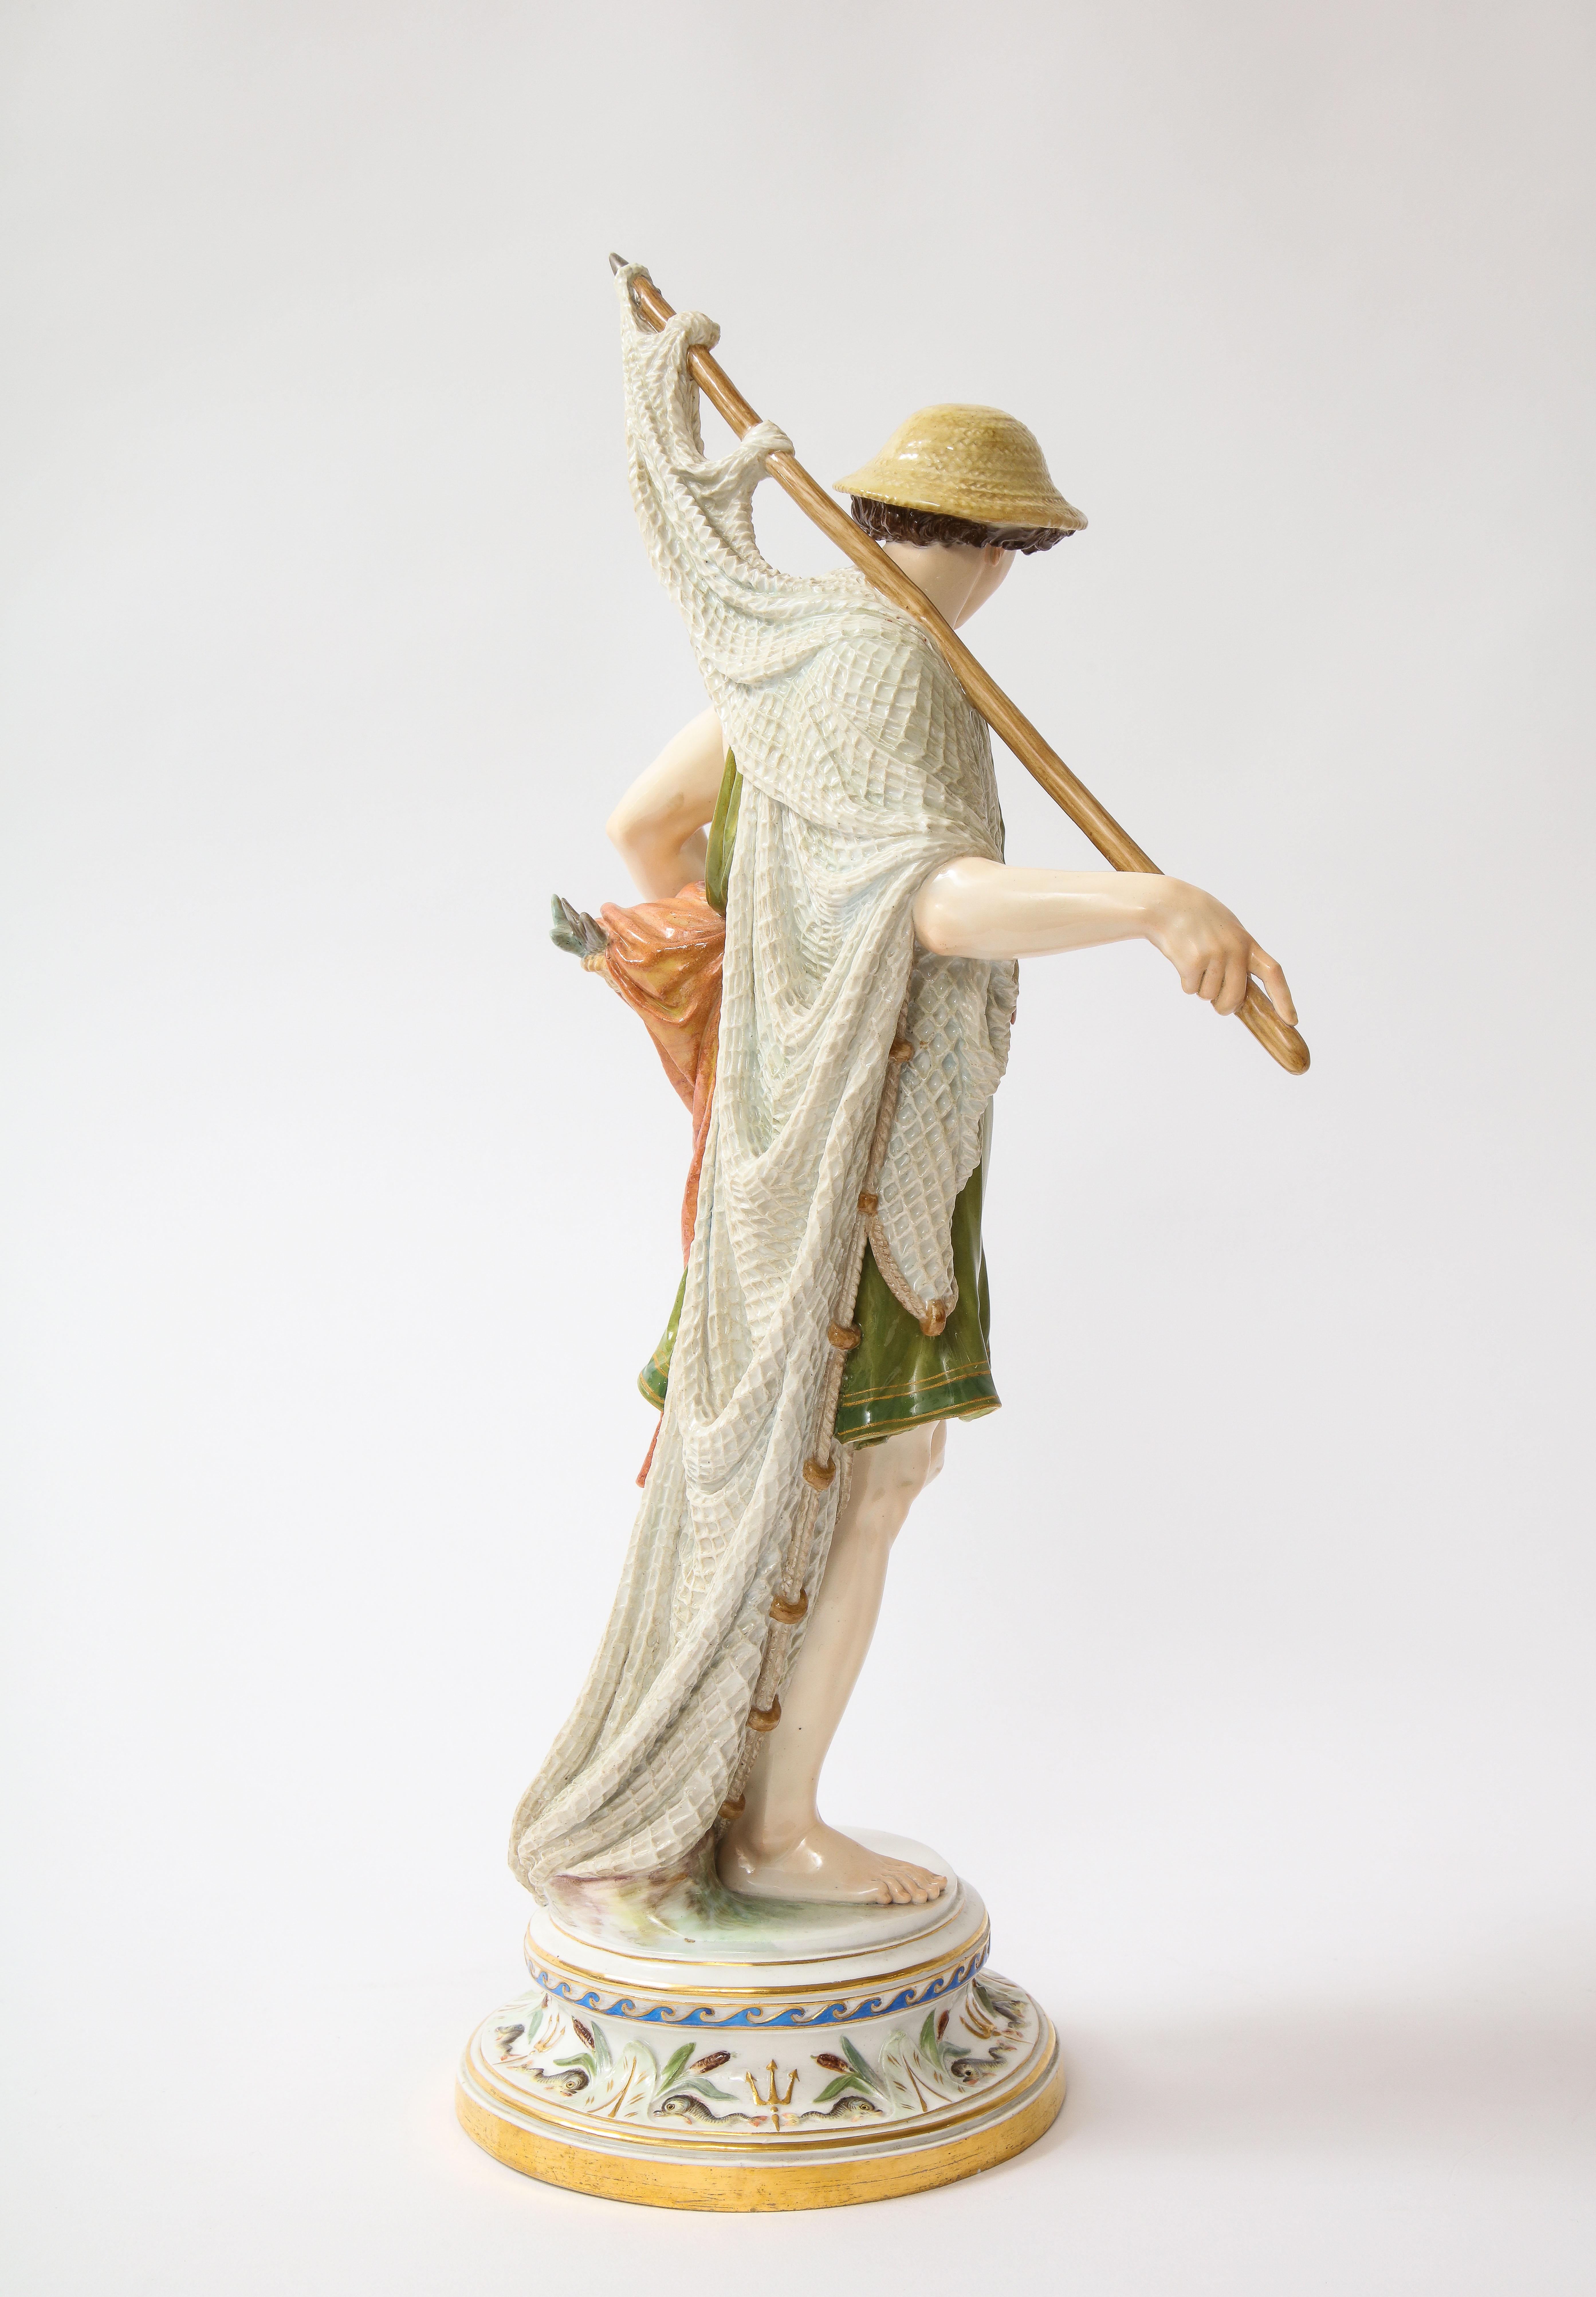 Other A Large 19th C. Meissen Porcelain Figure of a Fisherman with a Net For Sale